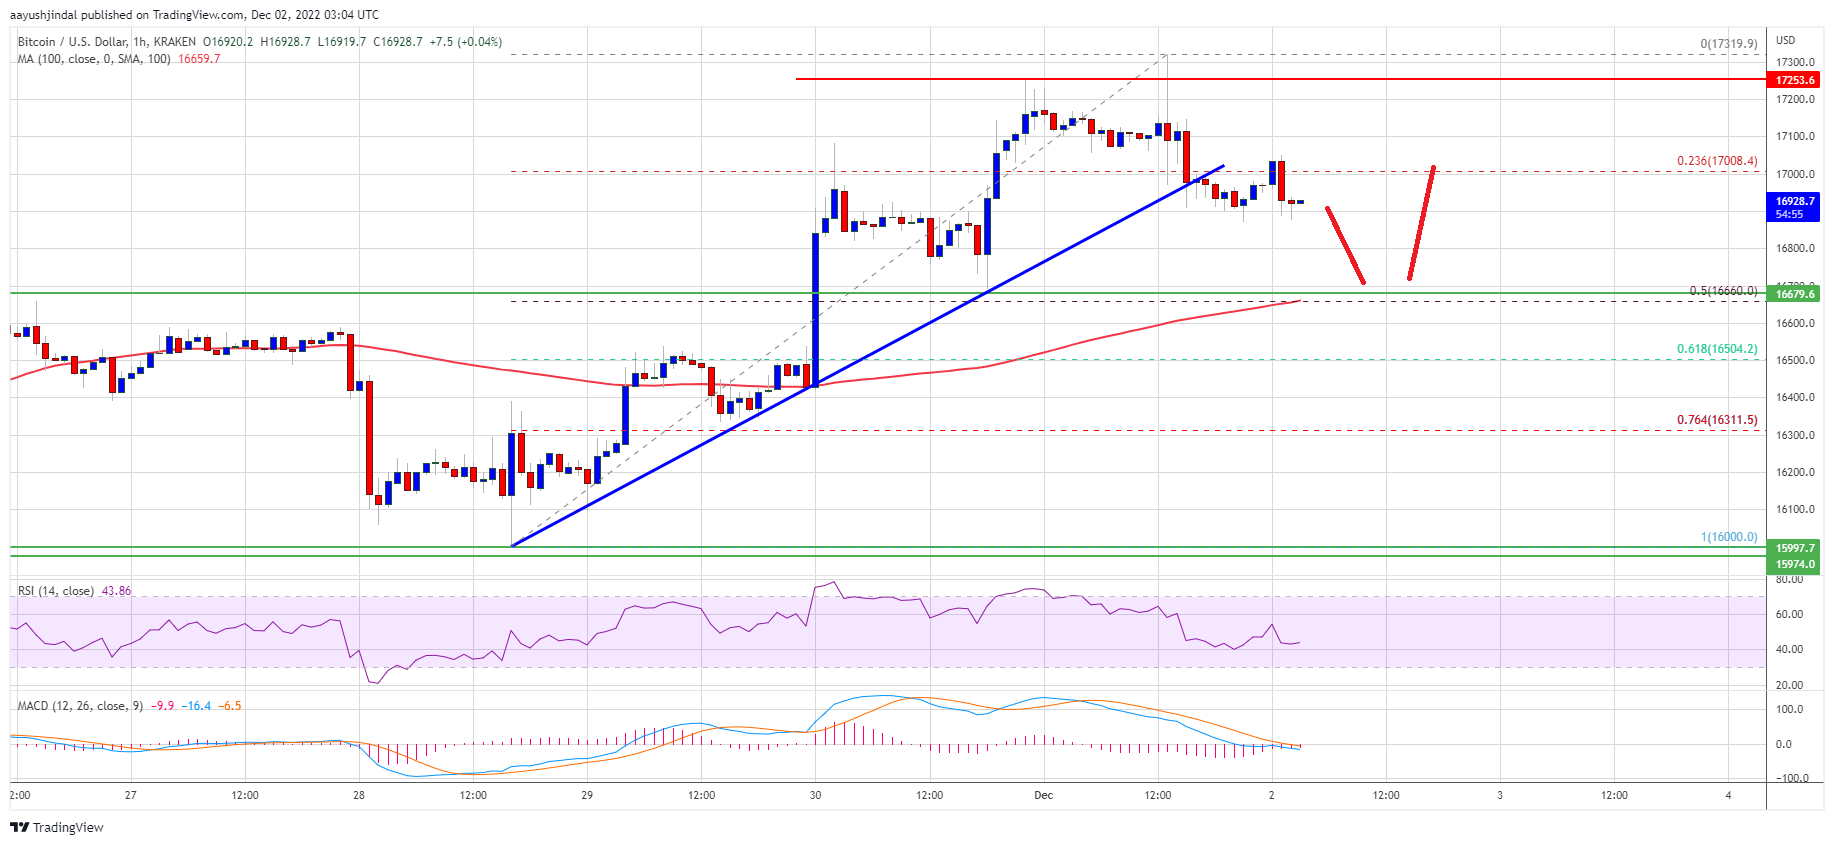 Bitcoin Price Starts Technical Correction, Here’s Key Support To Watch